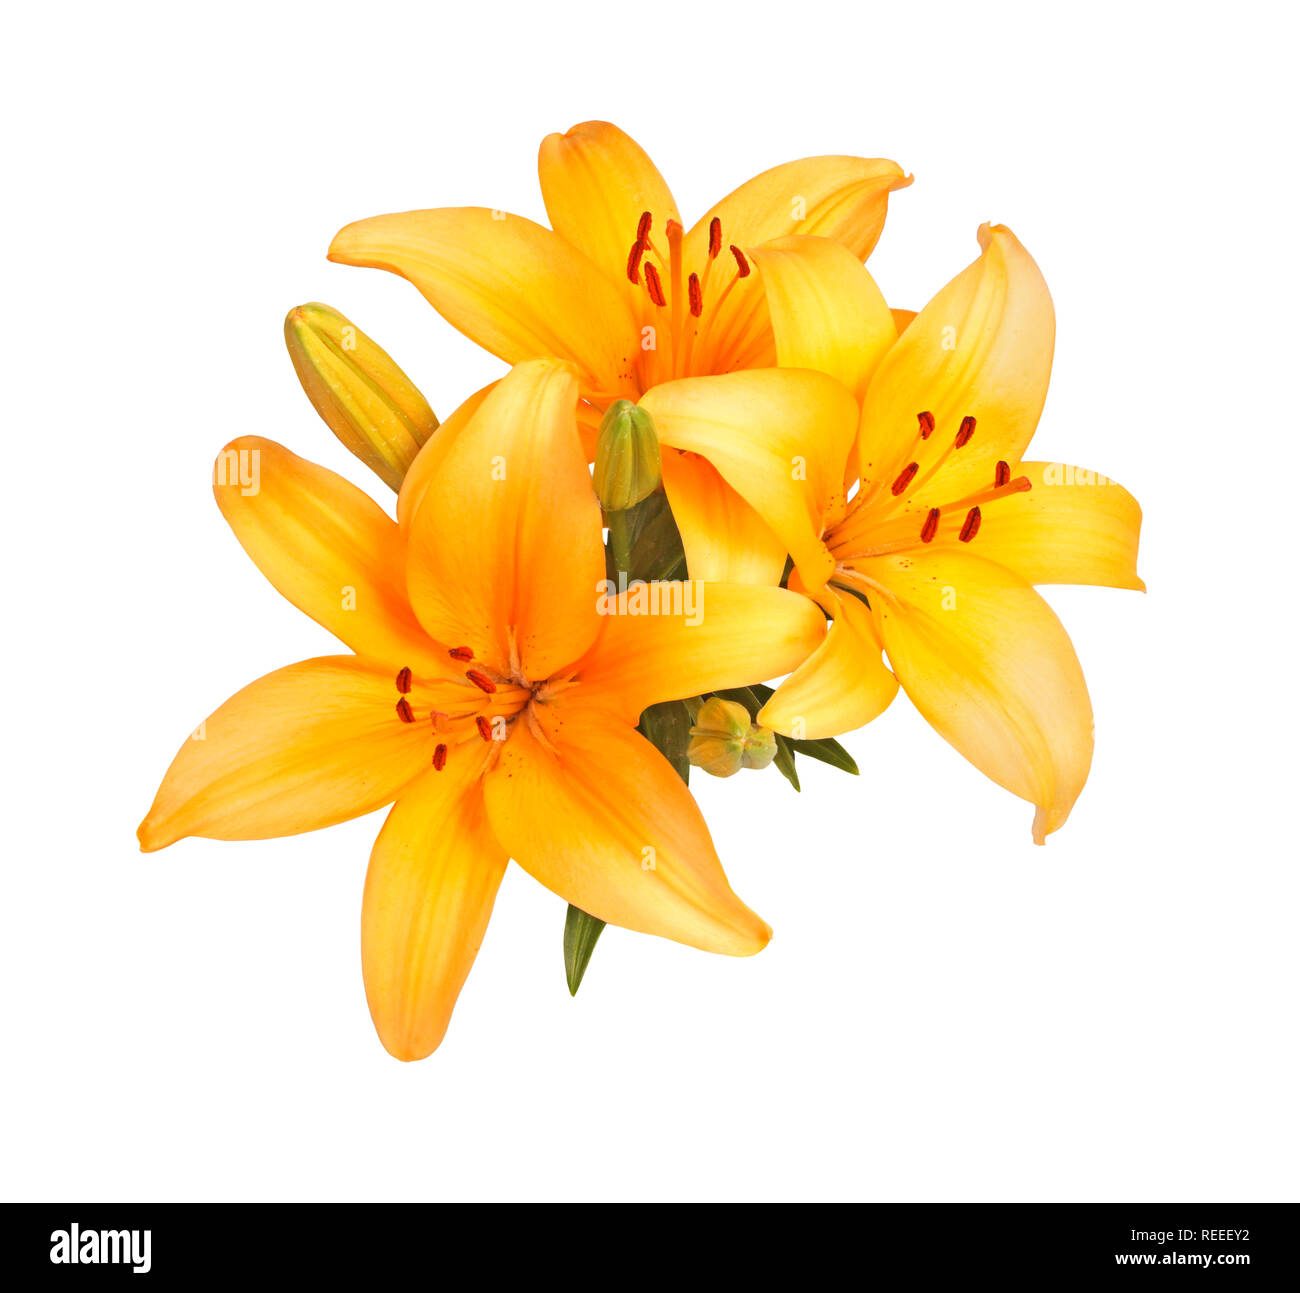 Single cluster of bright orange flowers of an Asiatic lily hybrid isolated against a white background Stock Photo